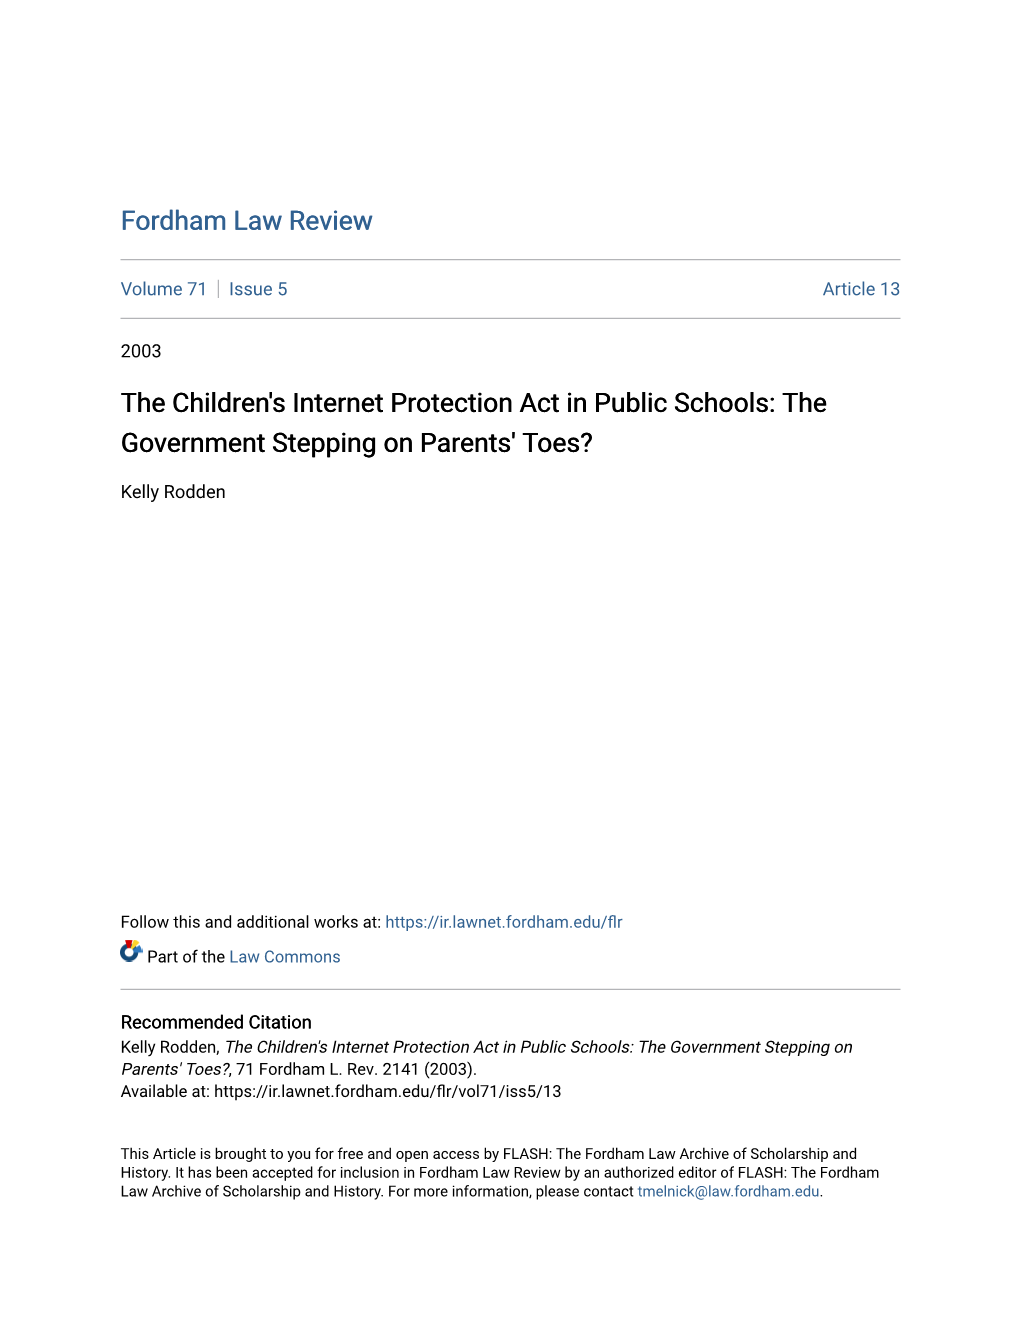 The Children's Internet Protection Act in Public Schools: the Government Stepping on Parents' Toes?